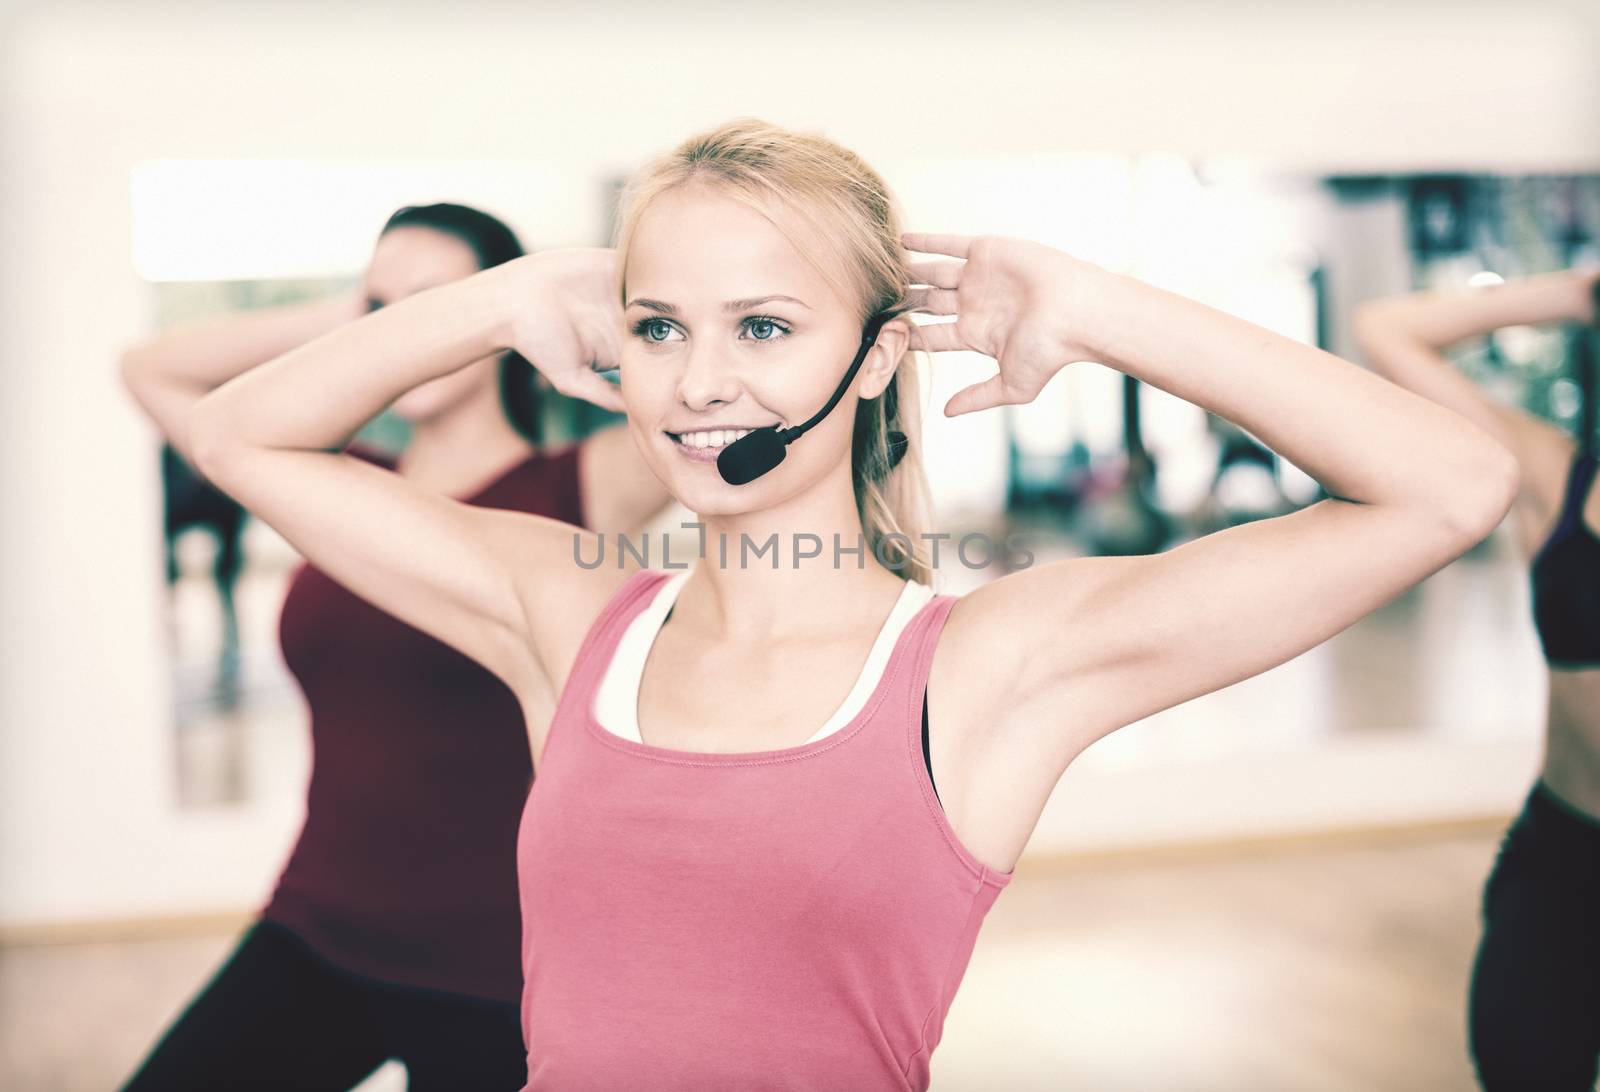 group of smiling people exercising in the gym by dolgachov